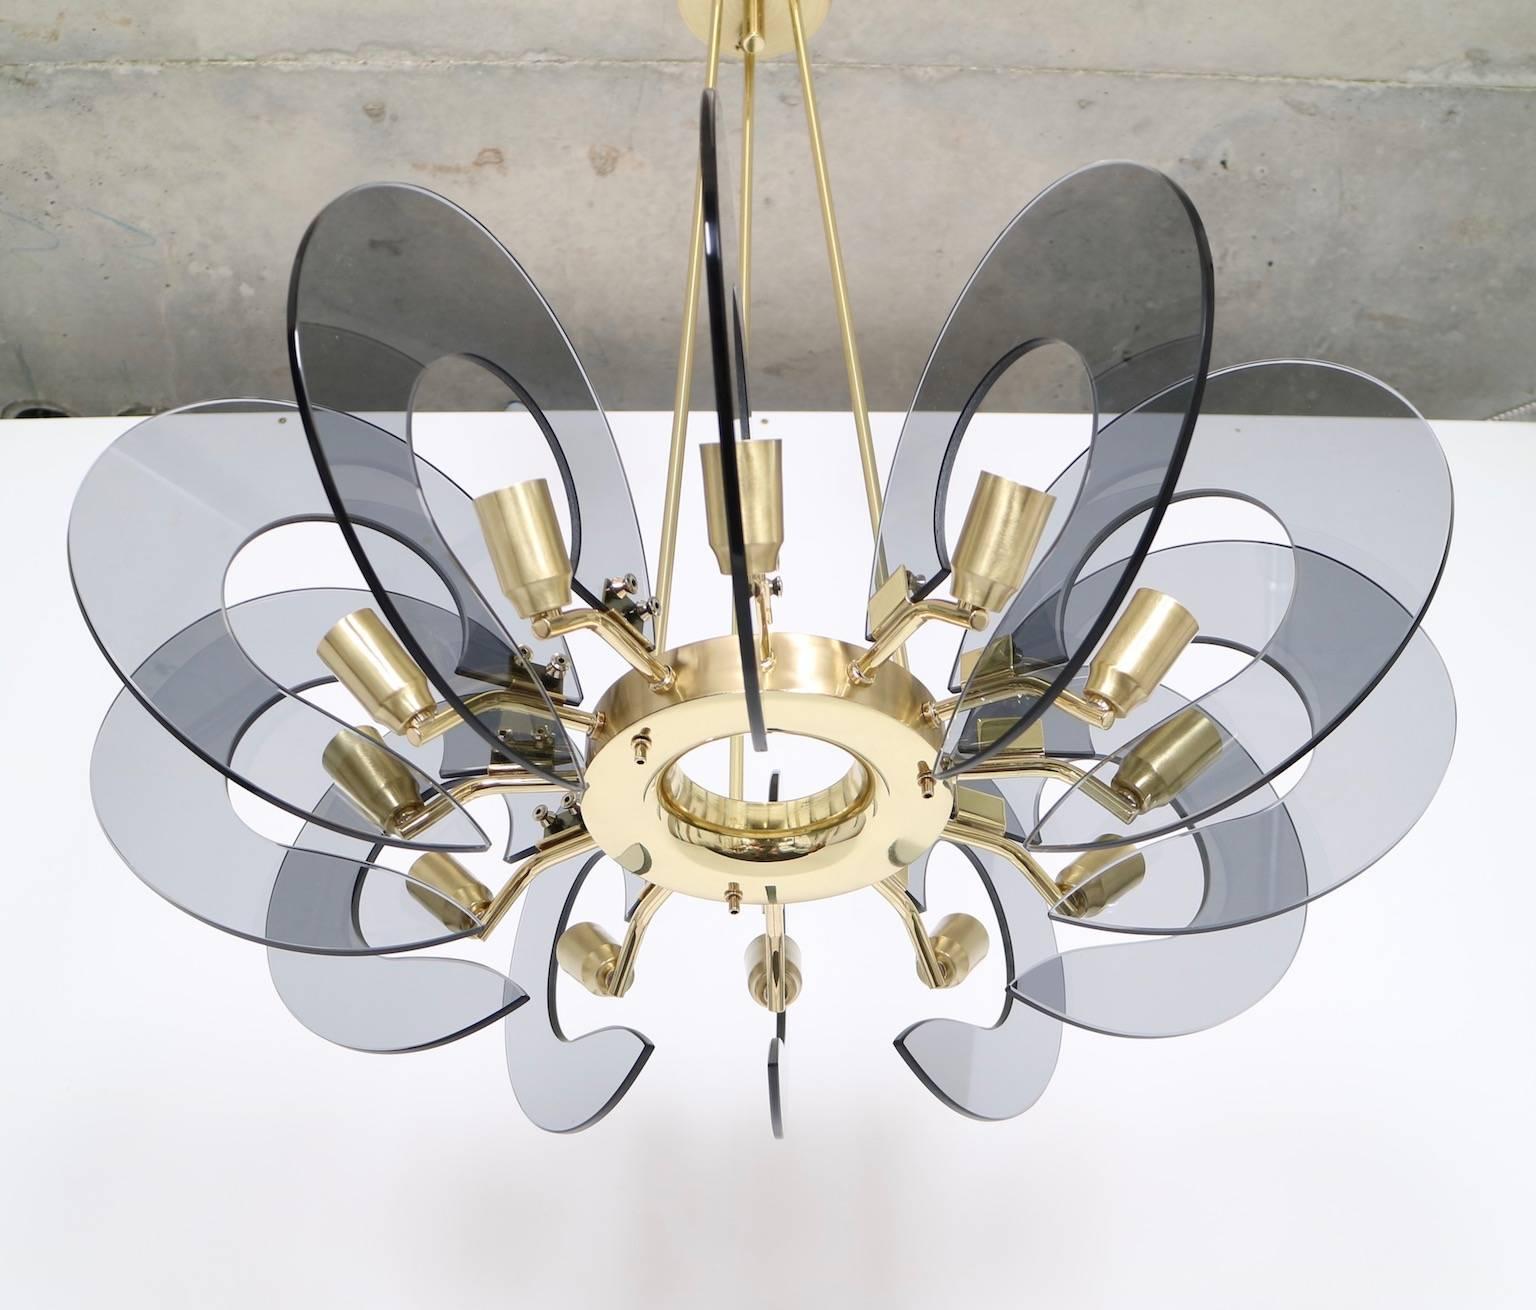 Mid-Century Modern Restored Italian Chandelier in Brass and Blue Glass, Attributed to Fontana Arte